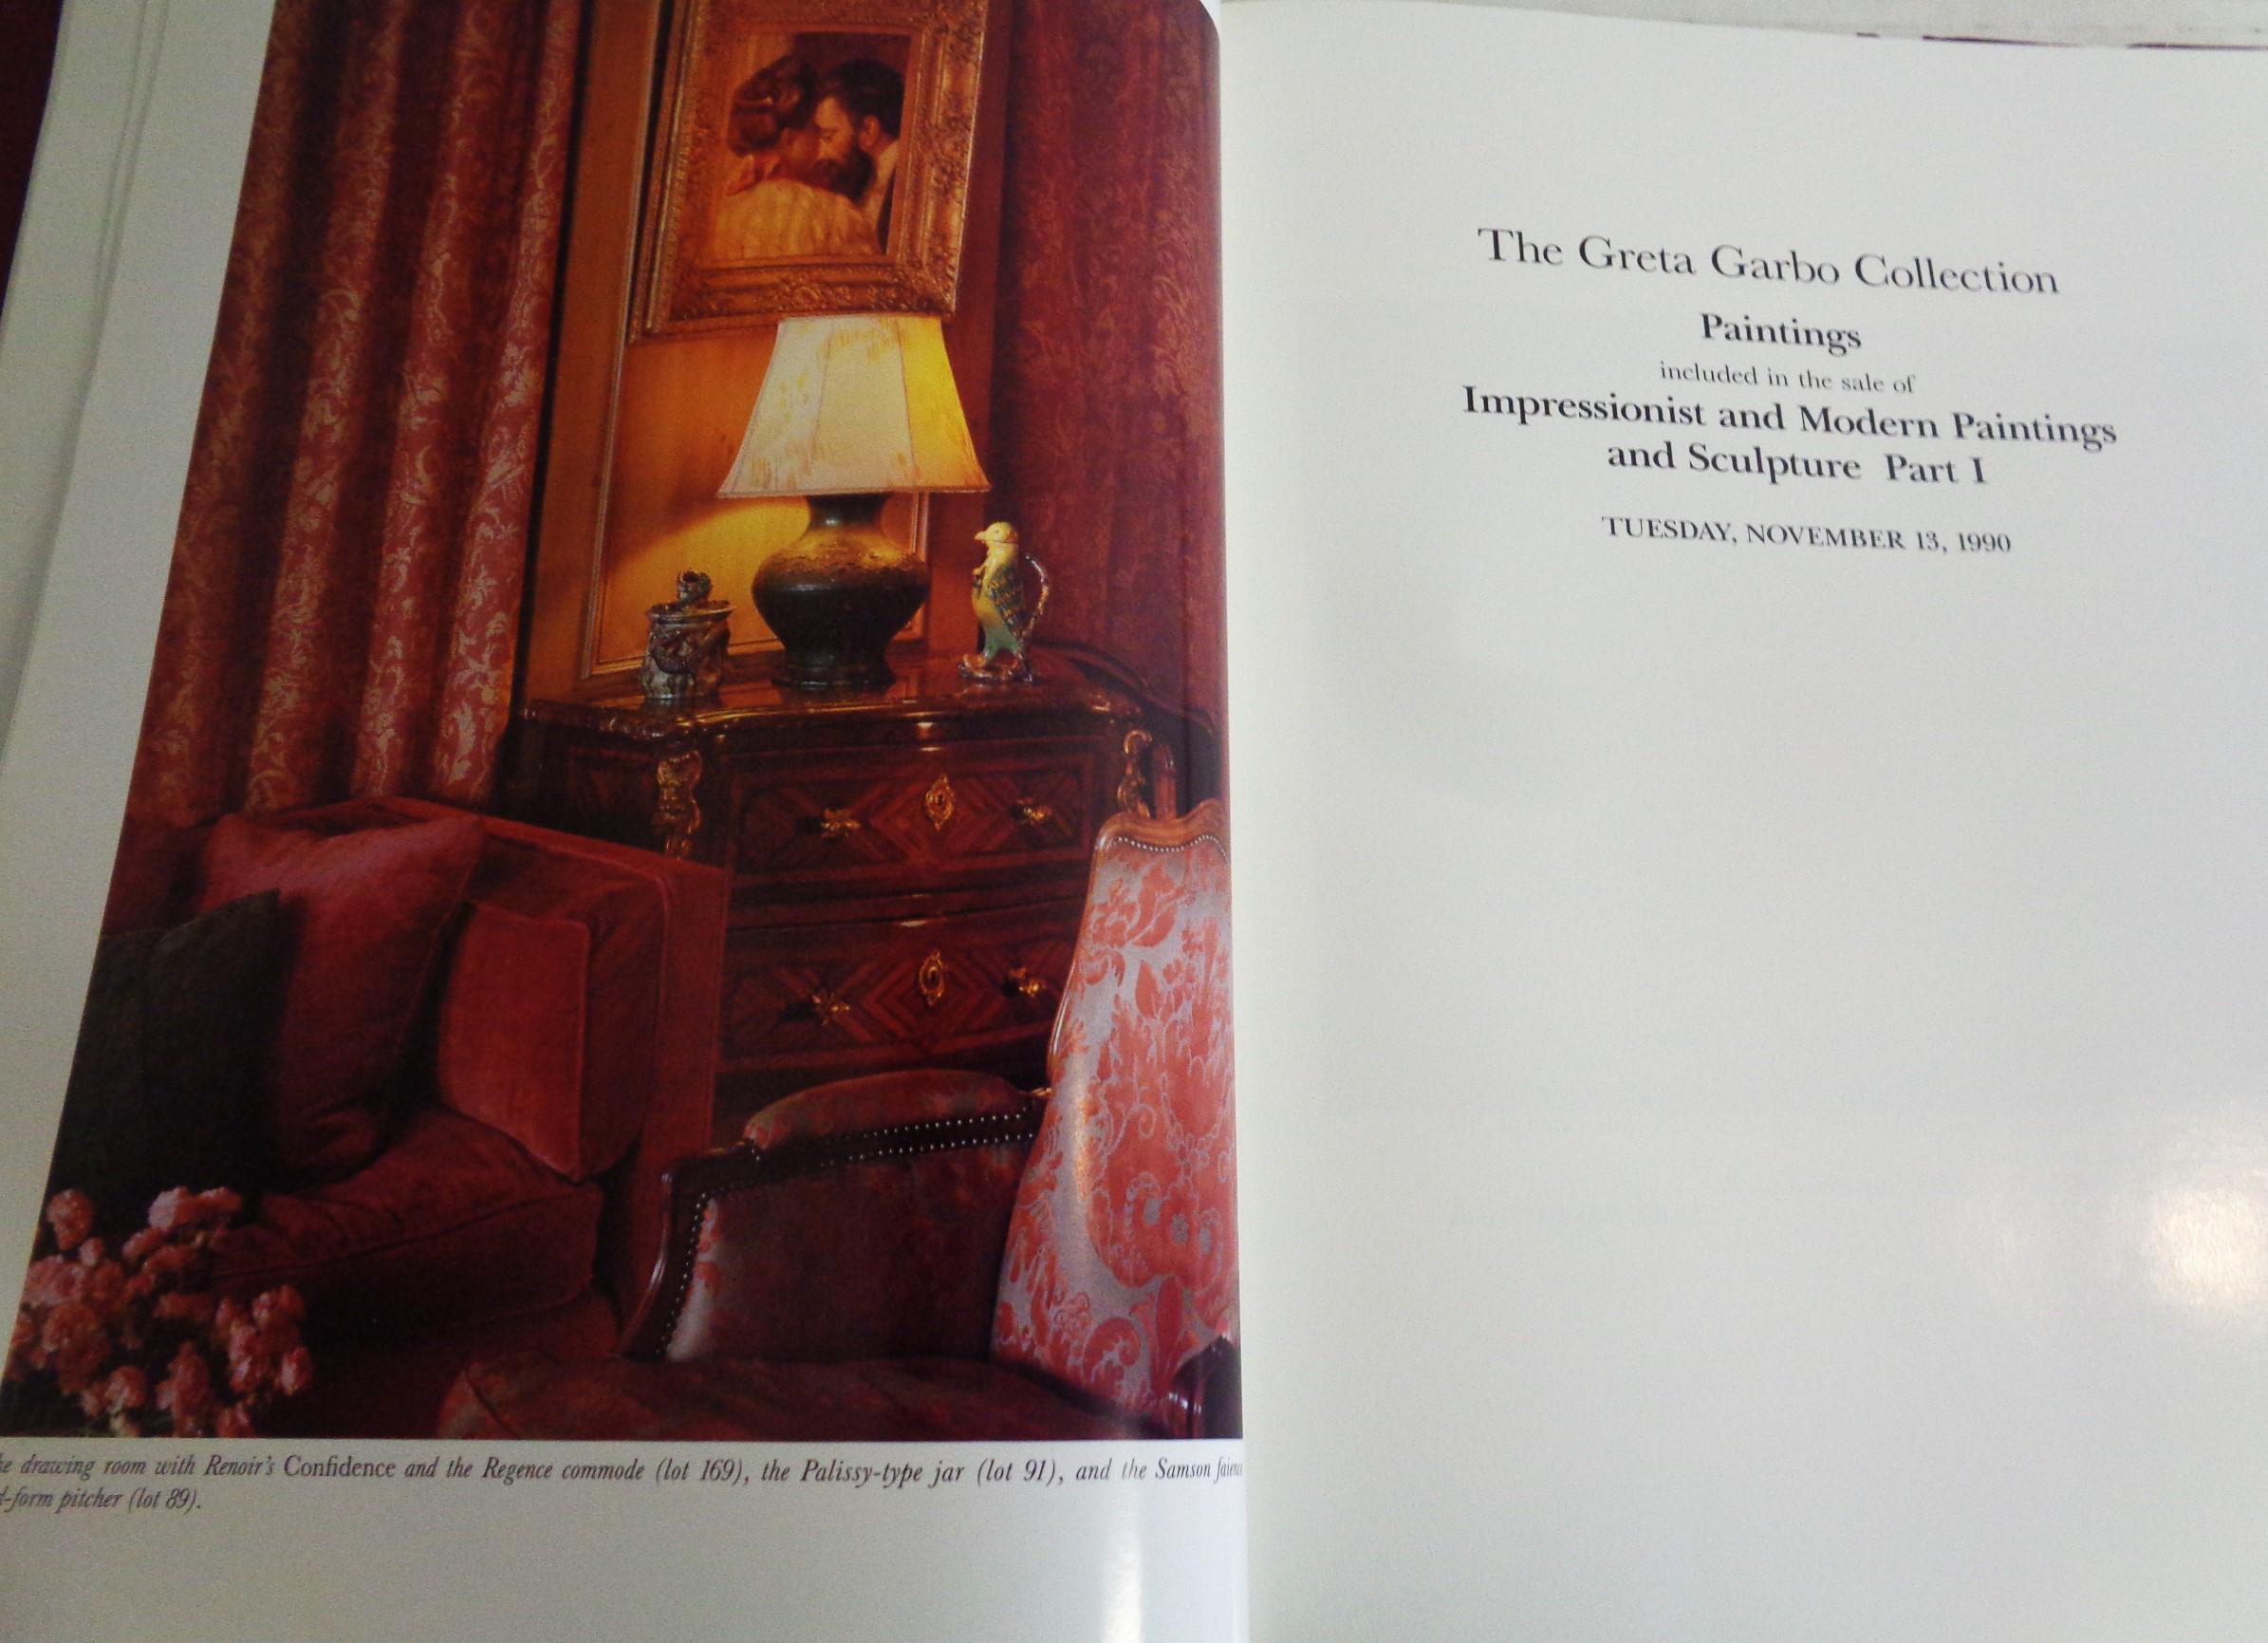 The Greta Garbo Collection Auction Catalog - 1990 Sotheby's - 1st Edition For Sale 2